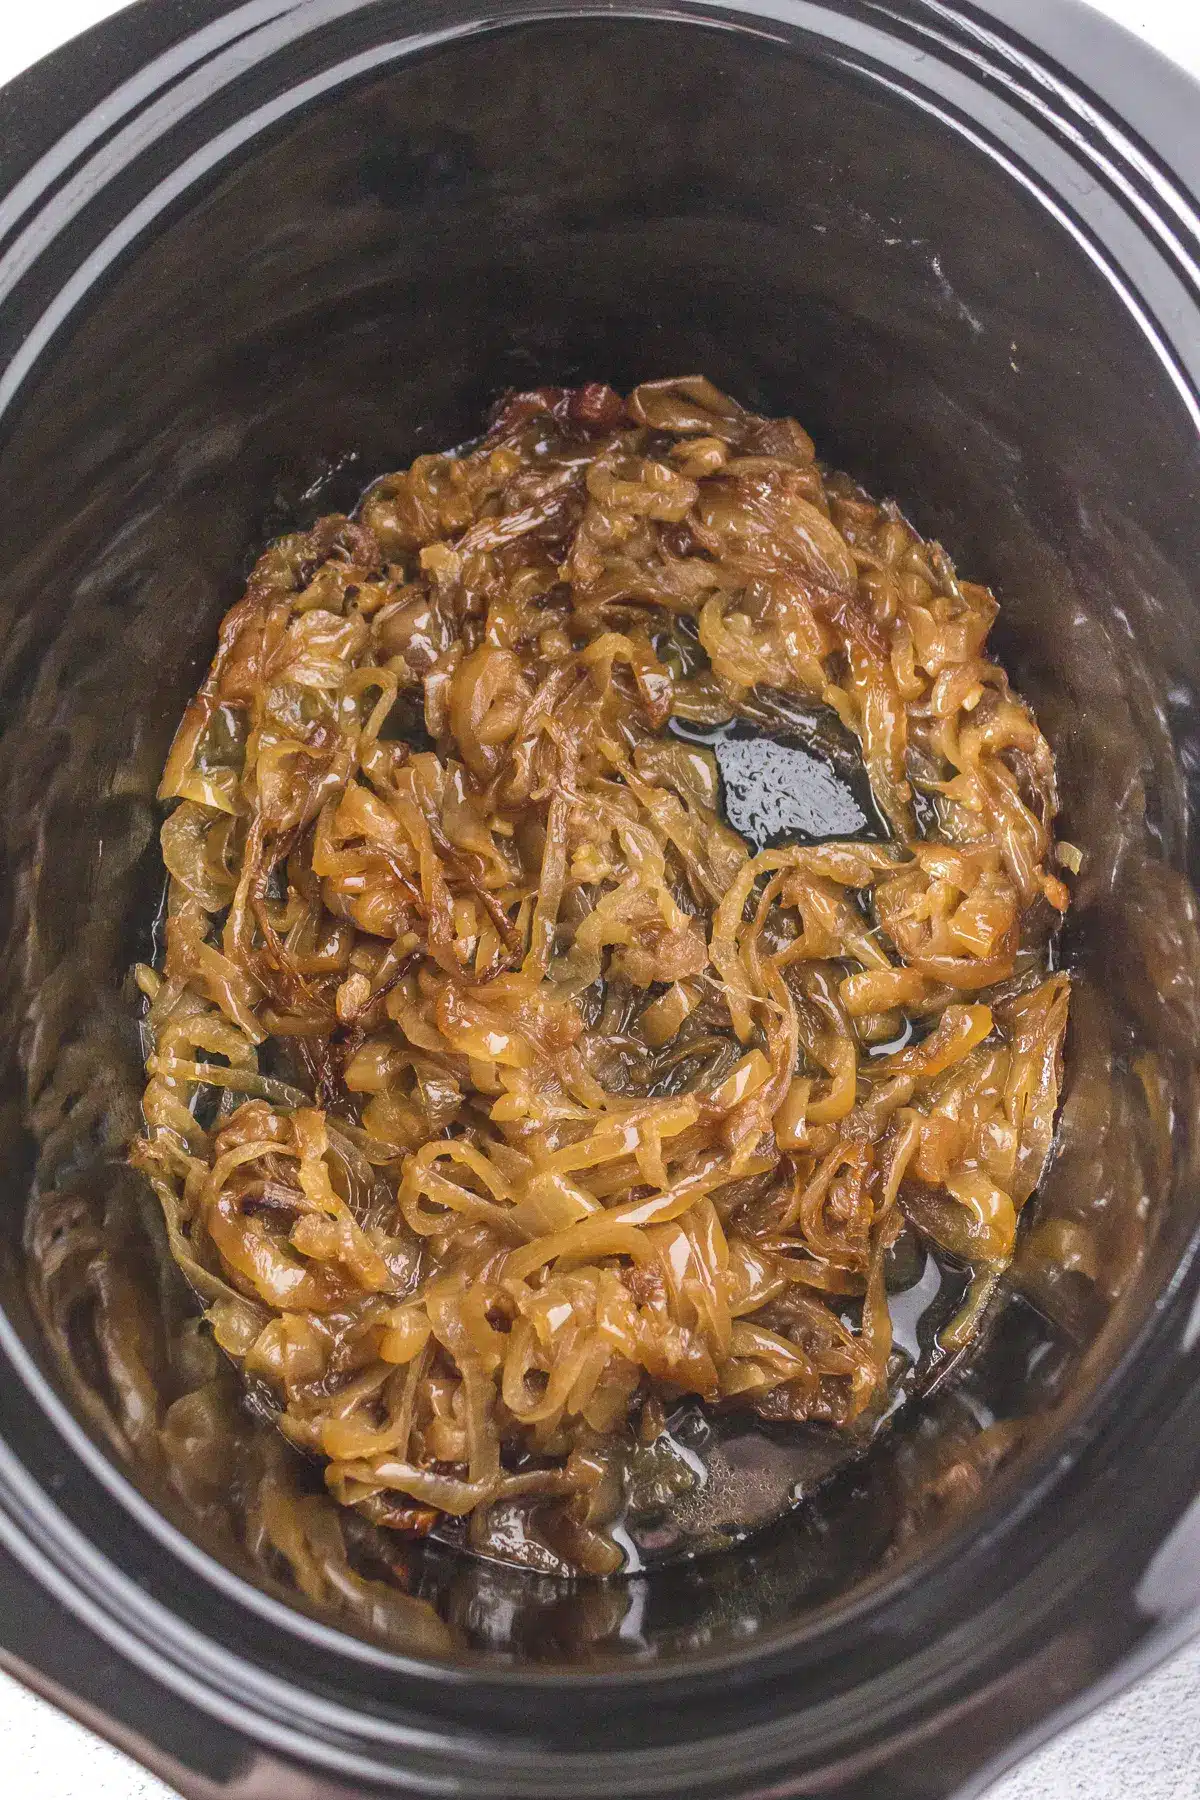 Slow cooker full of caramelized onions.